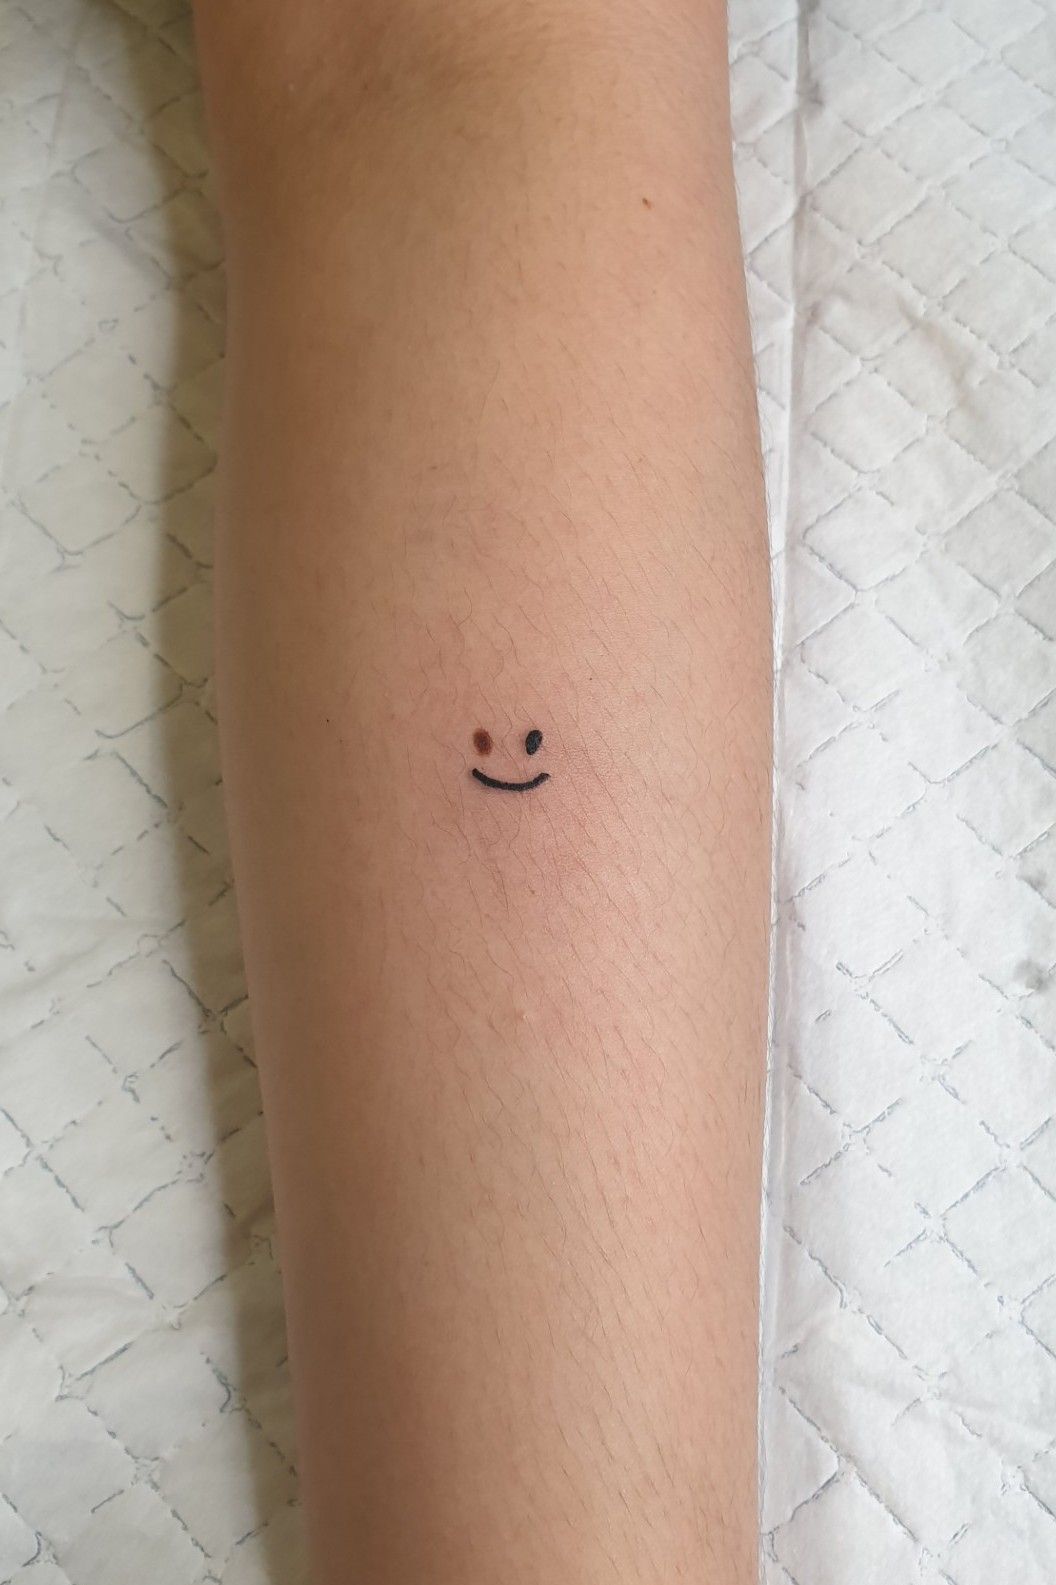 19 Cheerful Smiley Face Tattoo Designs  Moms Got the Stuff